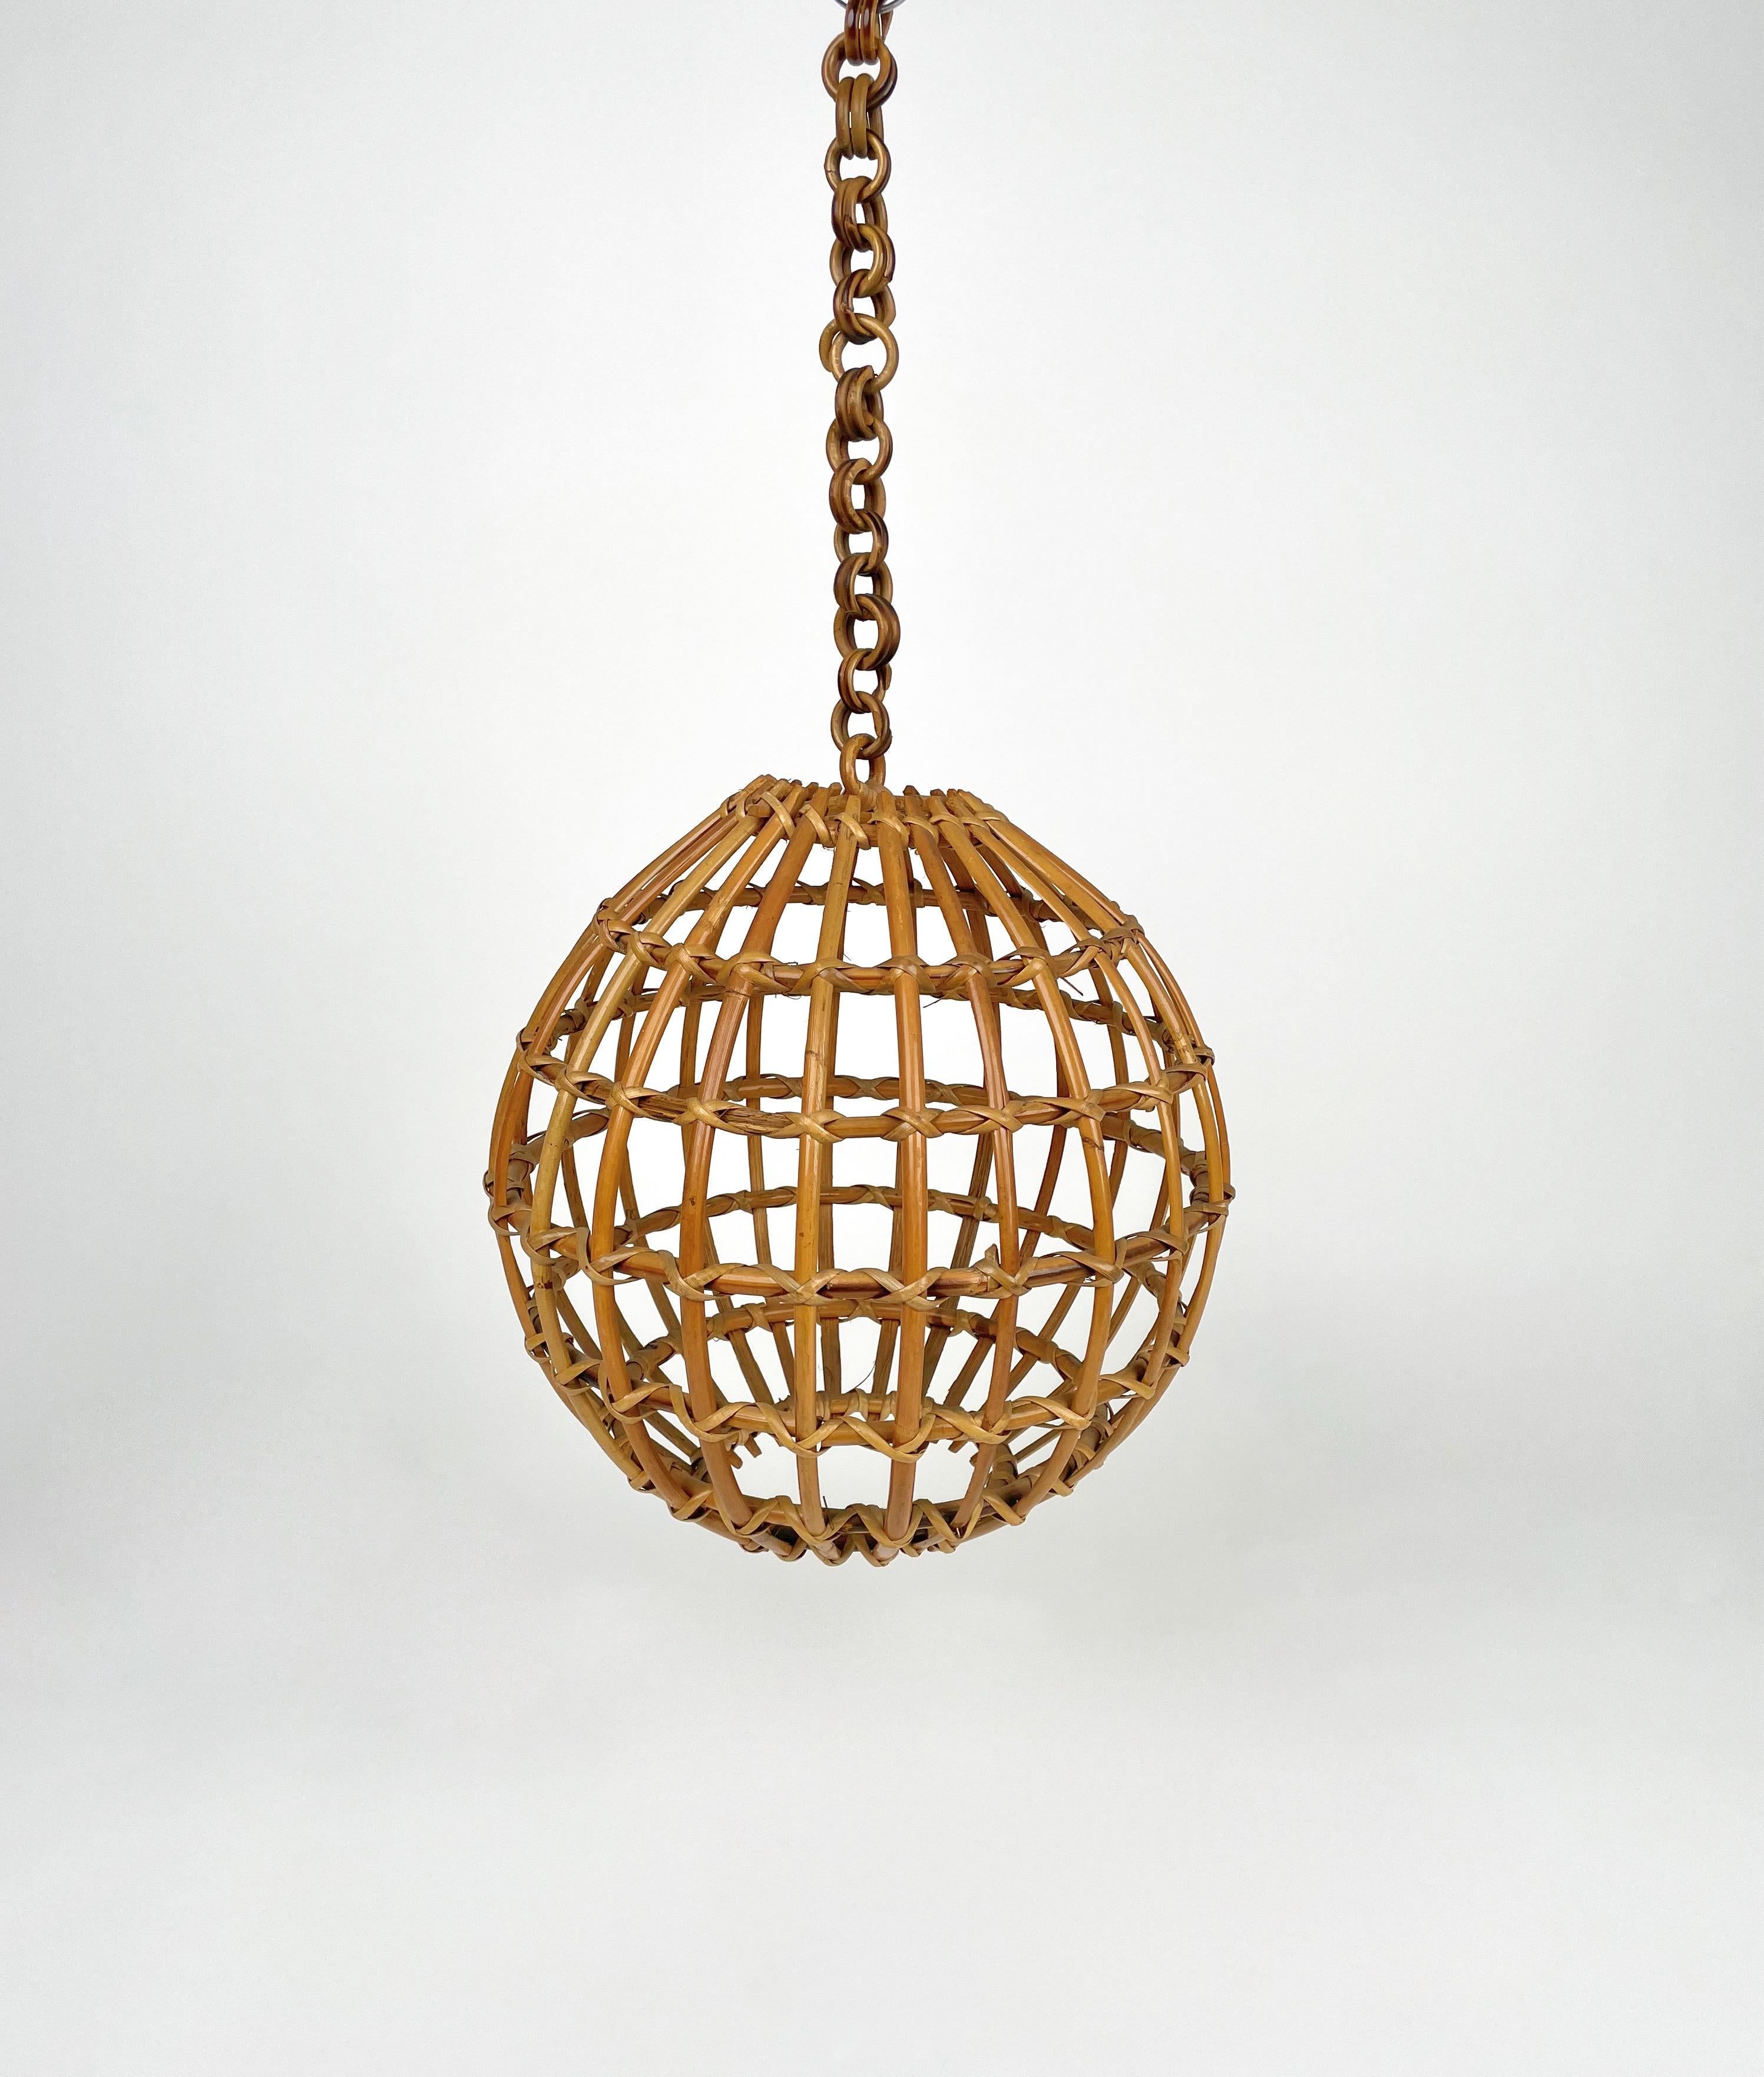 Italy Modern rattan pendent with globe or ball shaped lampshade. Made in Italy in the 1960s. This suspension lamp is entirely handcrafted with rattan. The ball shaped shade hangs from a chain with round rattan links which can be shortened to adjust